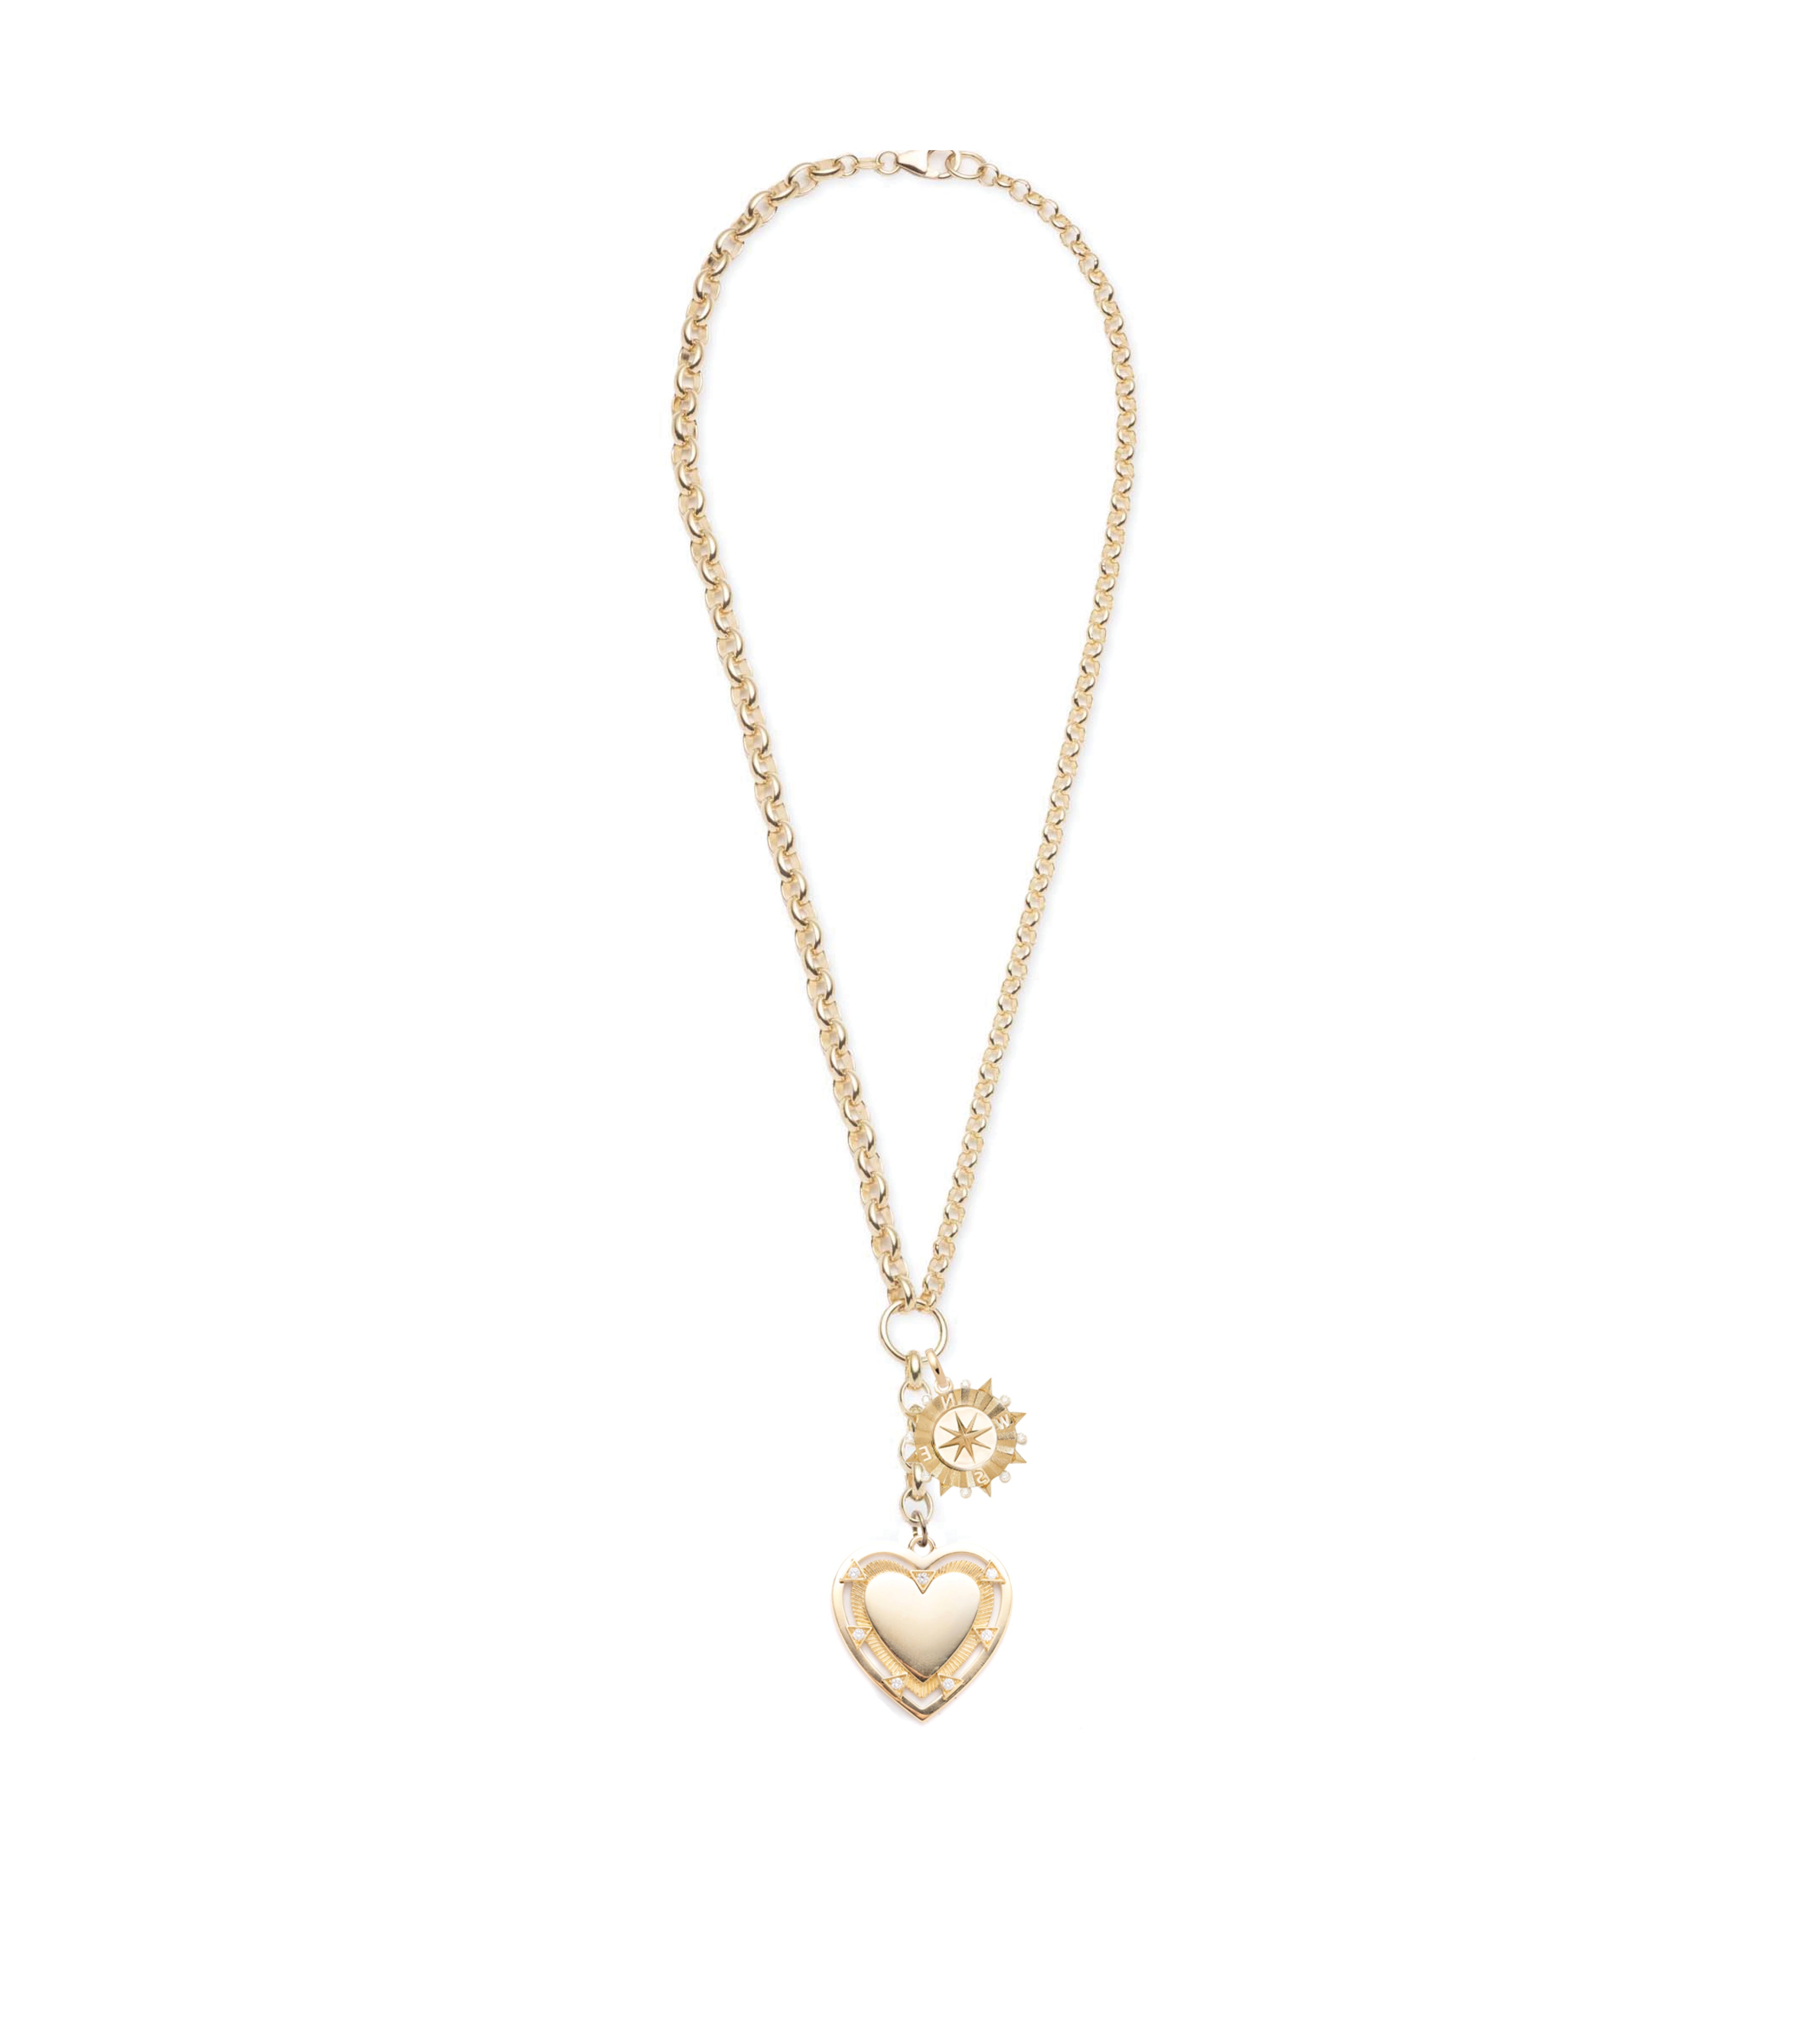 Love & Internal Compass : Heavy Mixed Belcher Extension Chain Necklace Story